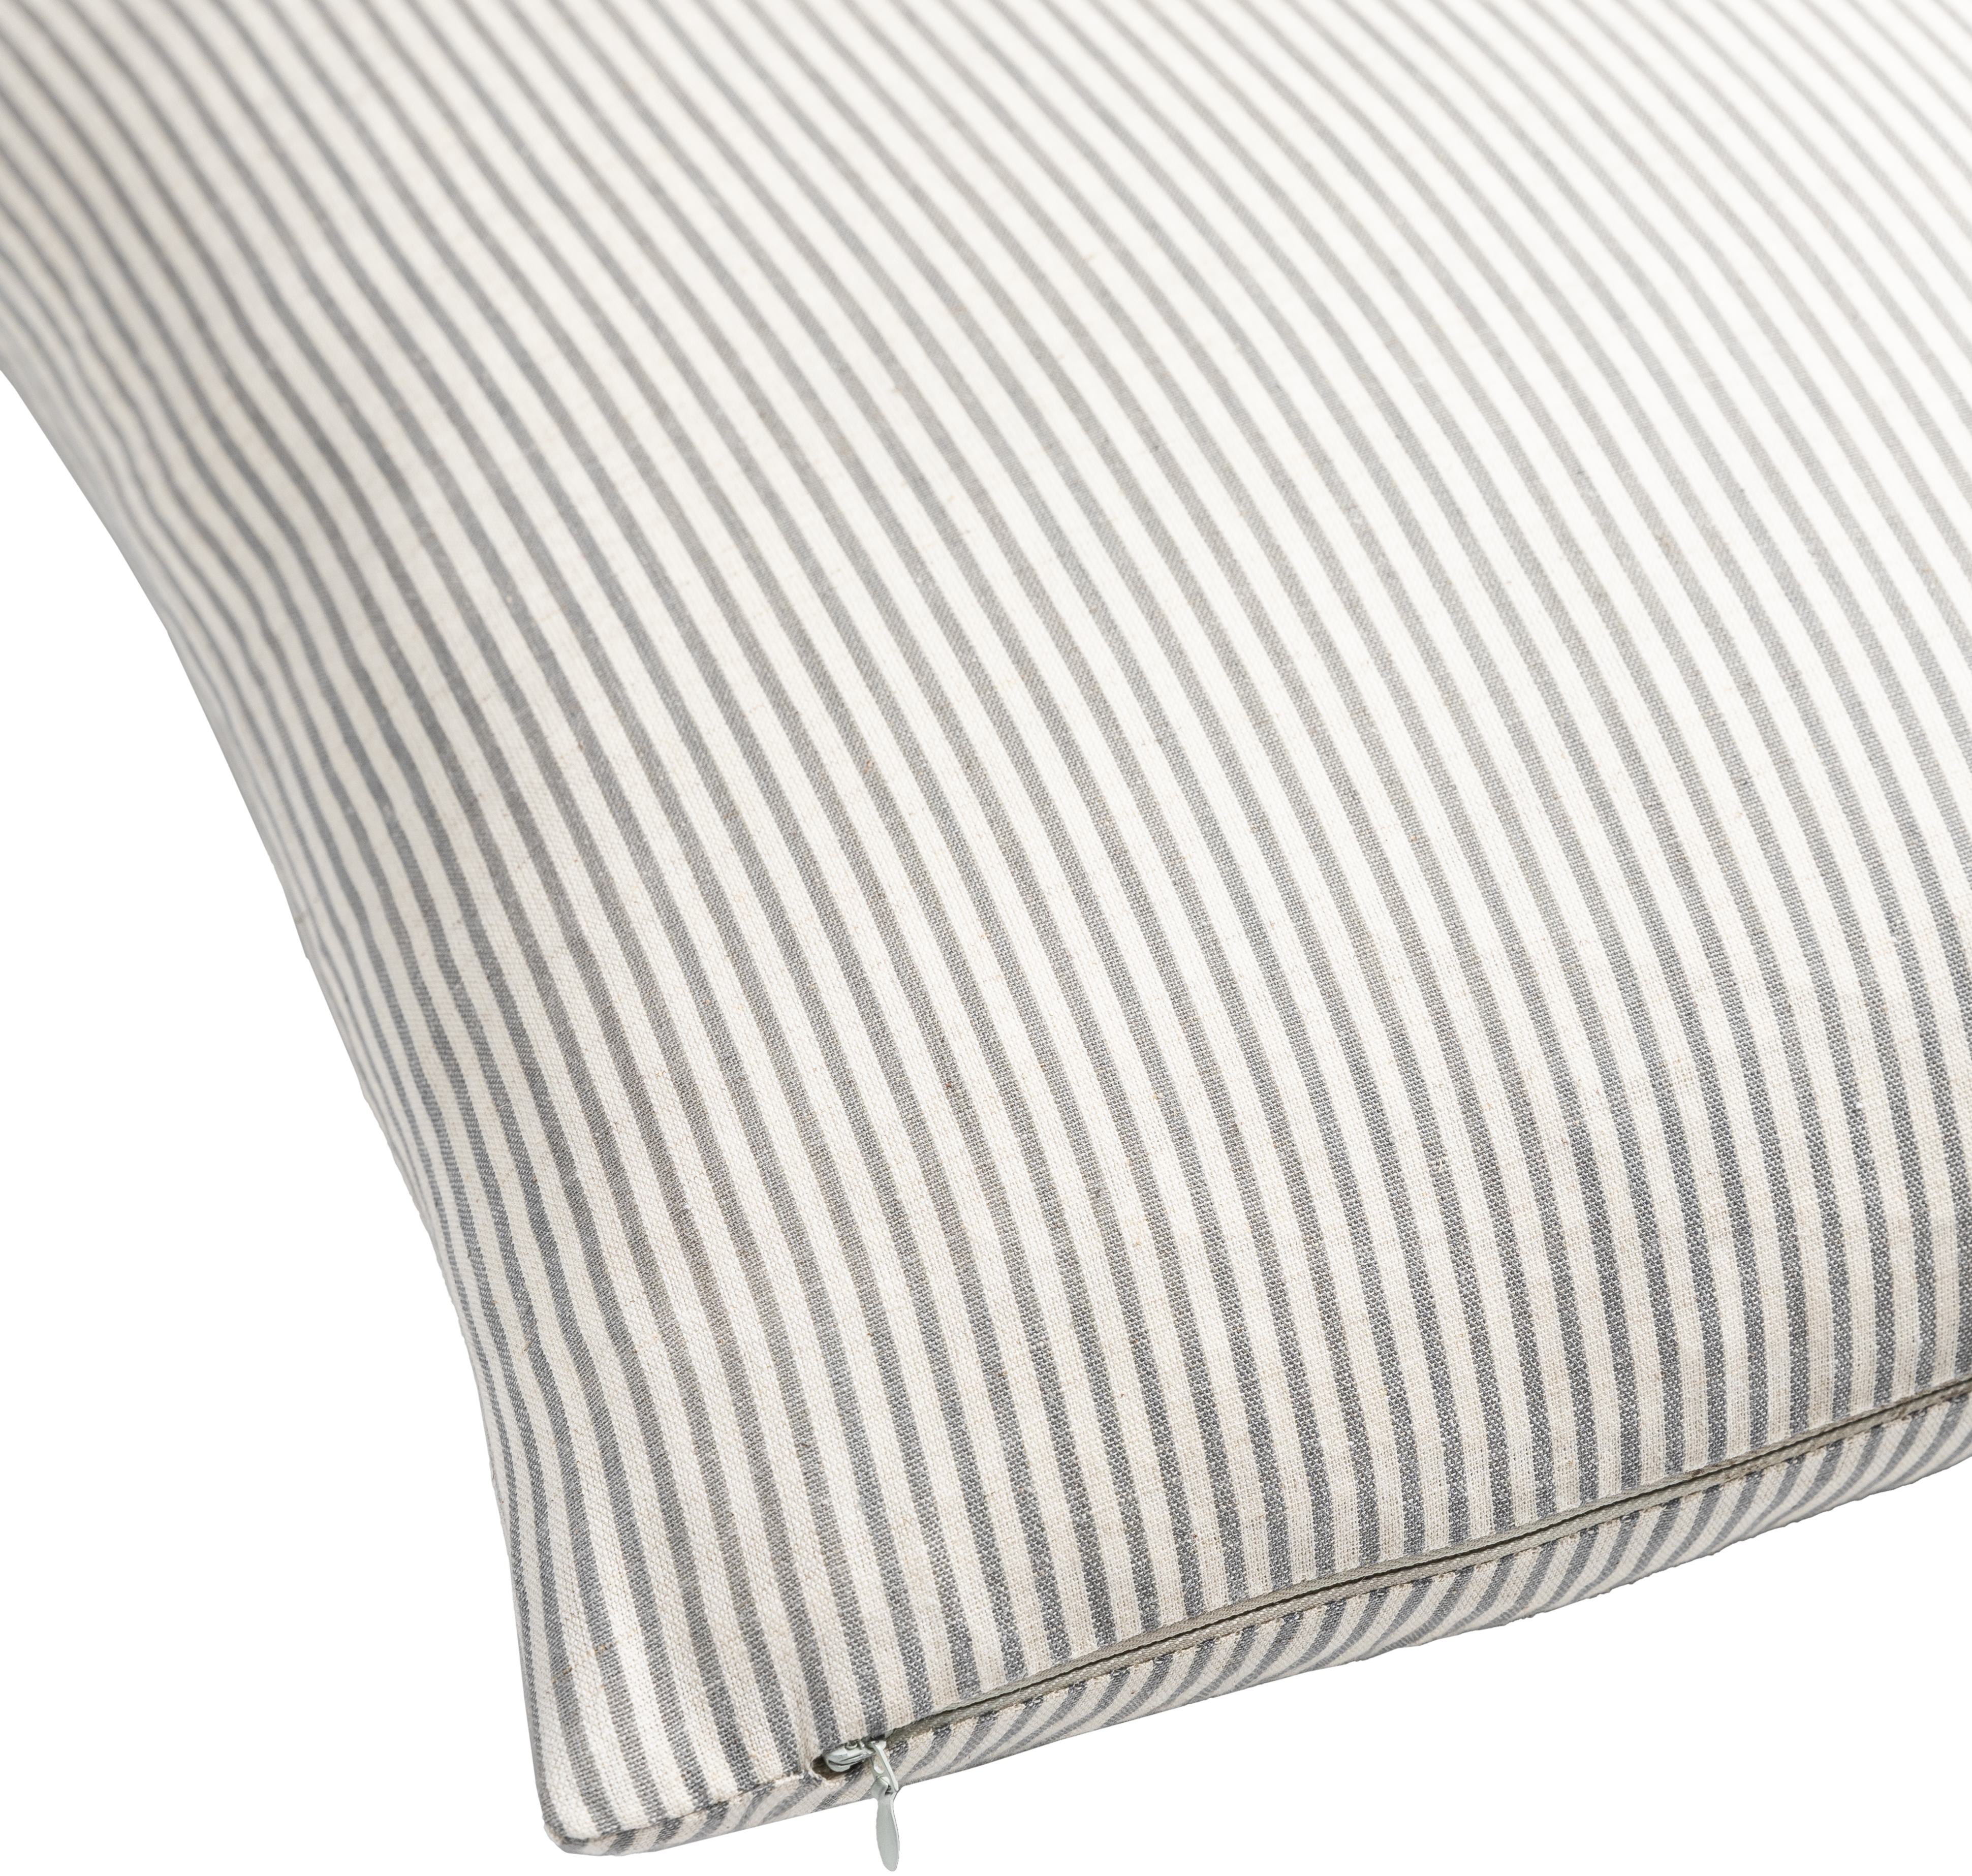 Skinny Stripe Throw Pillow, 20" x 20", with poly insert - Image 1